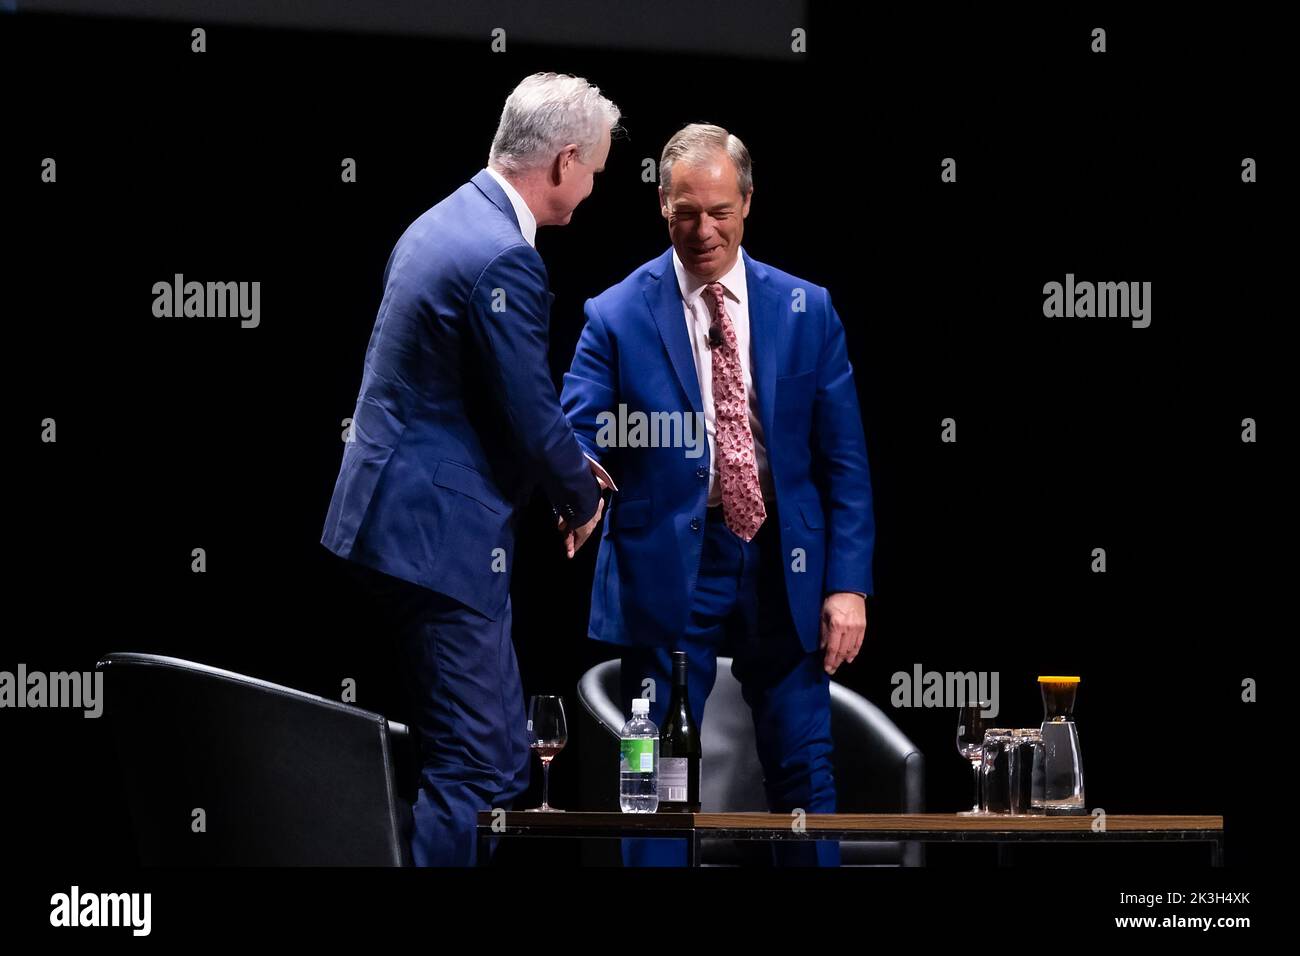 Melbourne, Australia, 26 September, 2022. Ross Cameron thanks Nigel Farage during An Evening With Nigel Farage at The Melbourne Convention and Exhibition Centre on September 26, 2022 in Melbourne, Australia. Credit: Dave Hewison/Speed Media/Alamy Live News Stock Photo